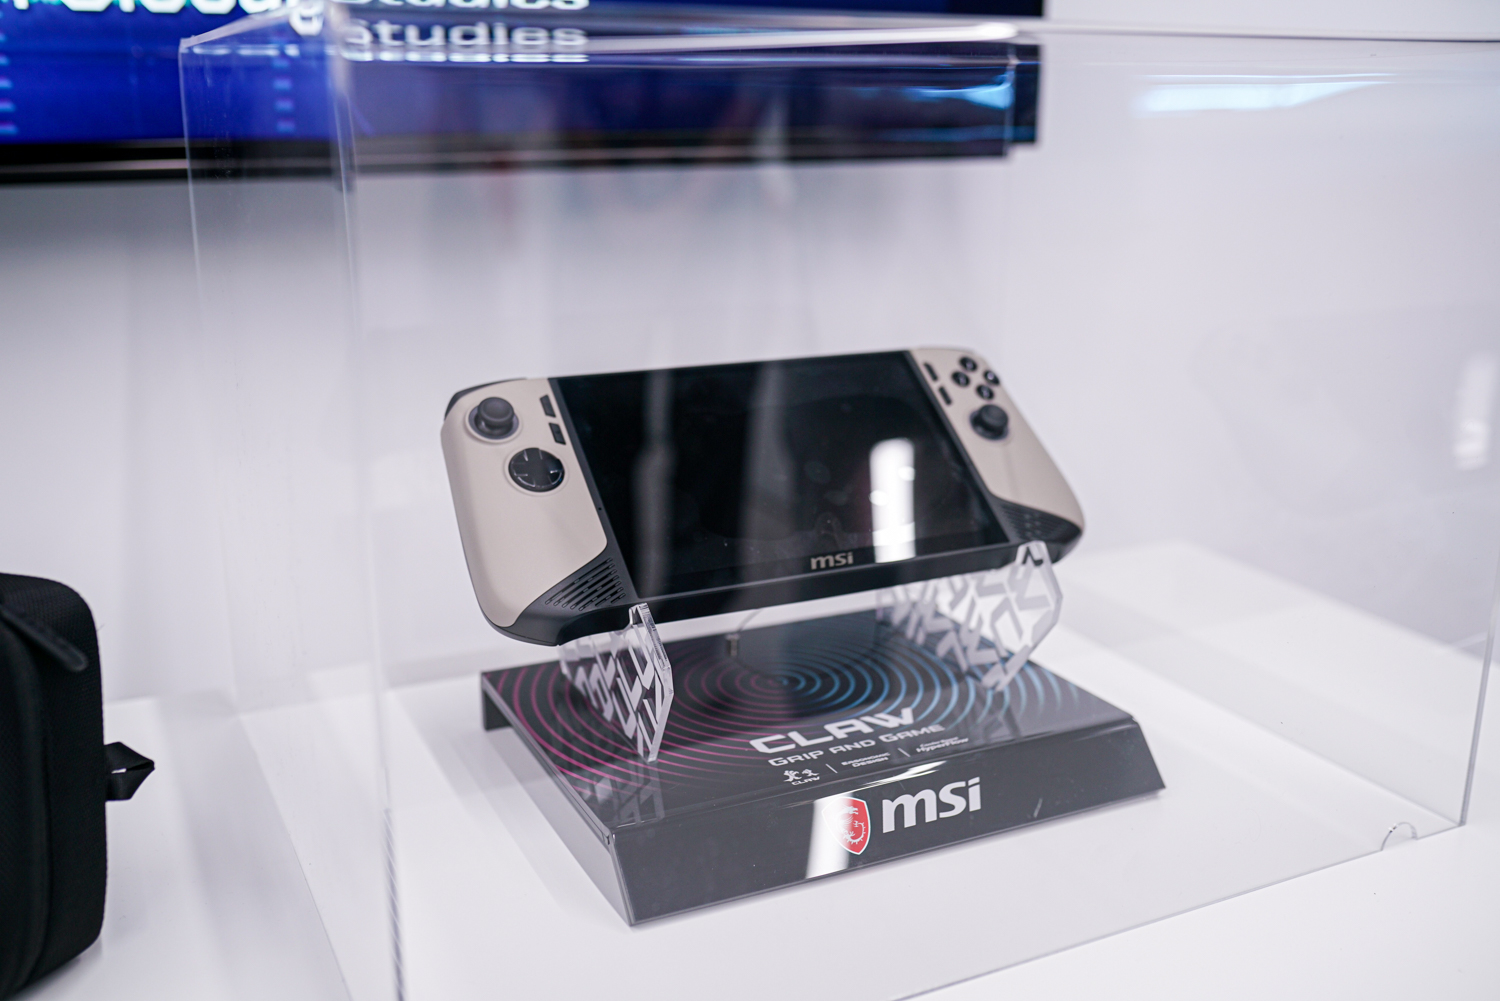 The MSI Claw sitting inside a display case.